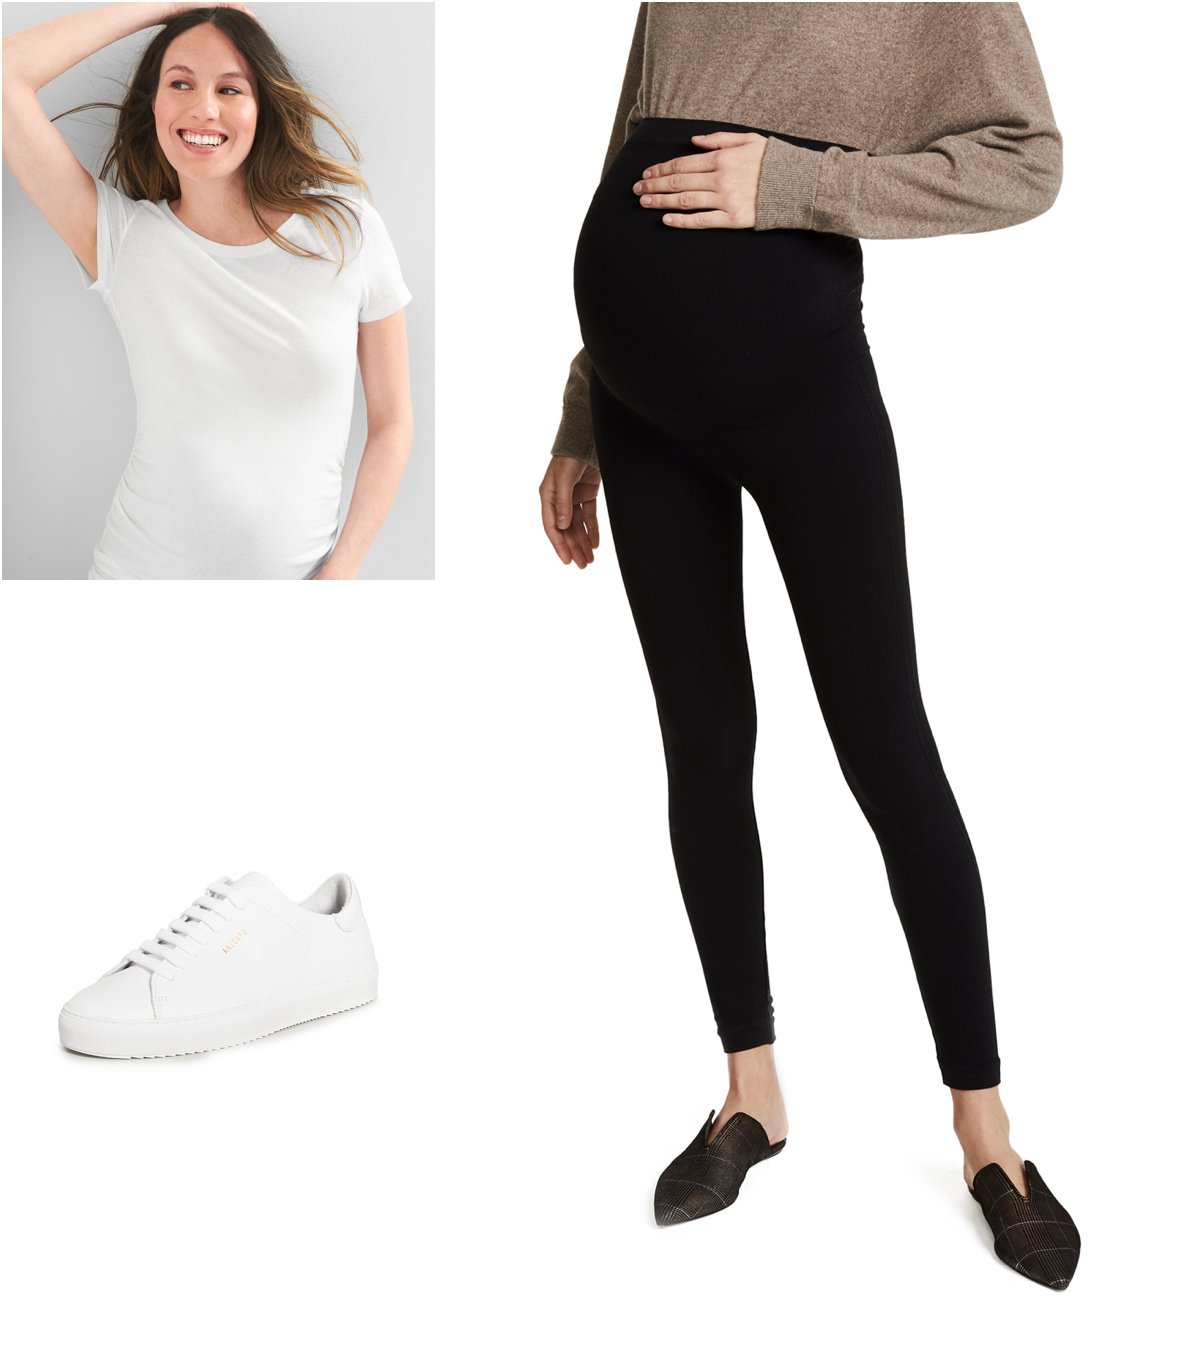 4 Different Looks Using The Same Maternity Tee, Leggings & Sneakers ...